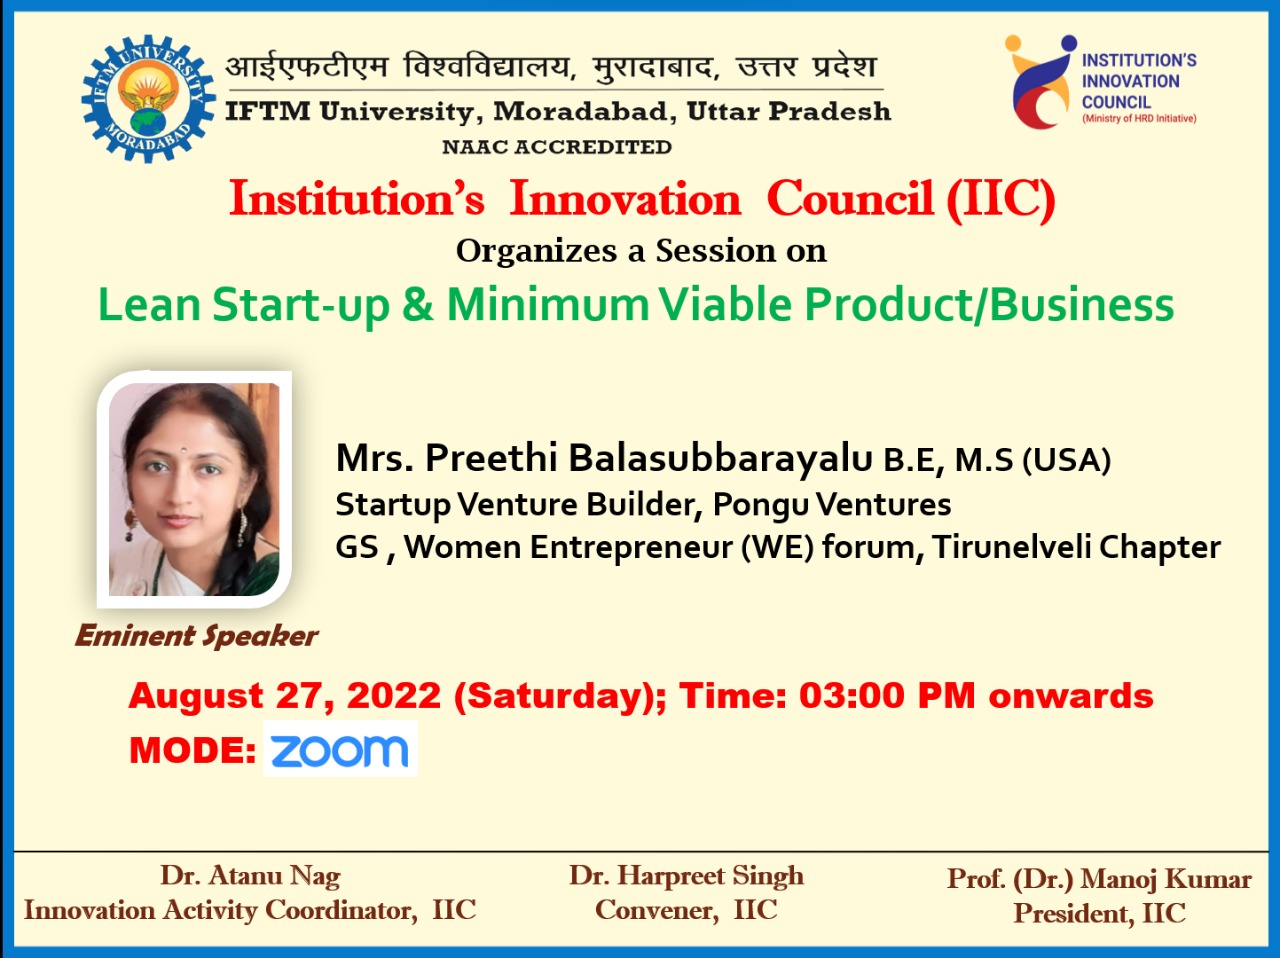 Session on Lean Start-up & Minimum Viable Product/Business.